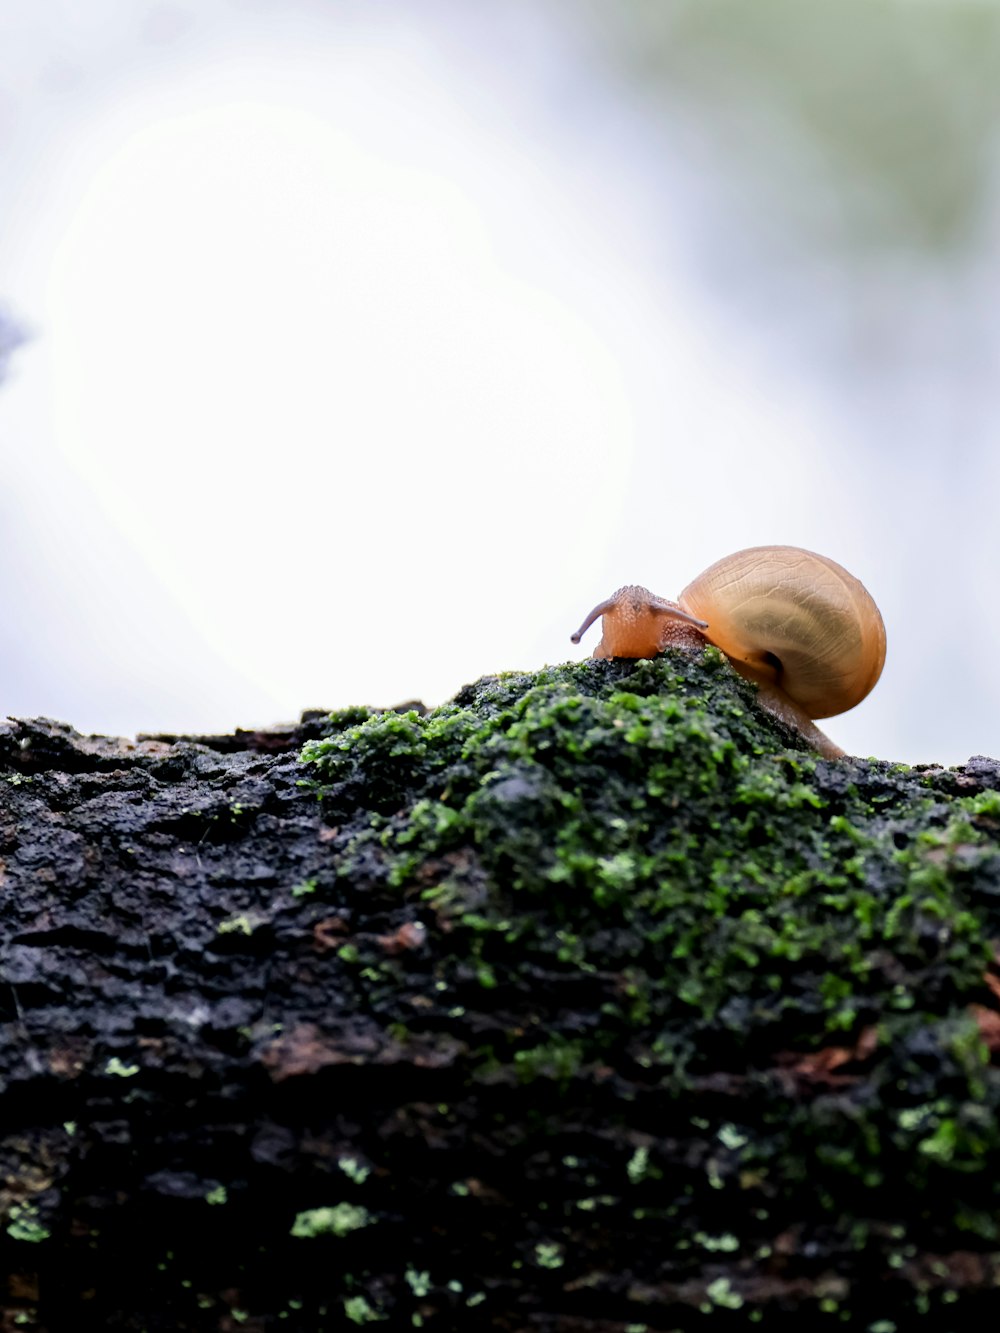 a snail is sitting on a mossy tree branch